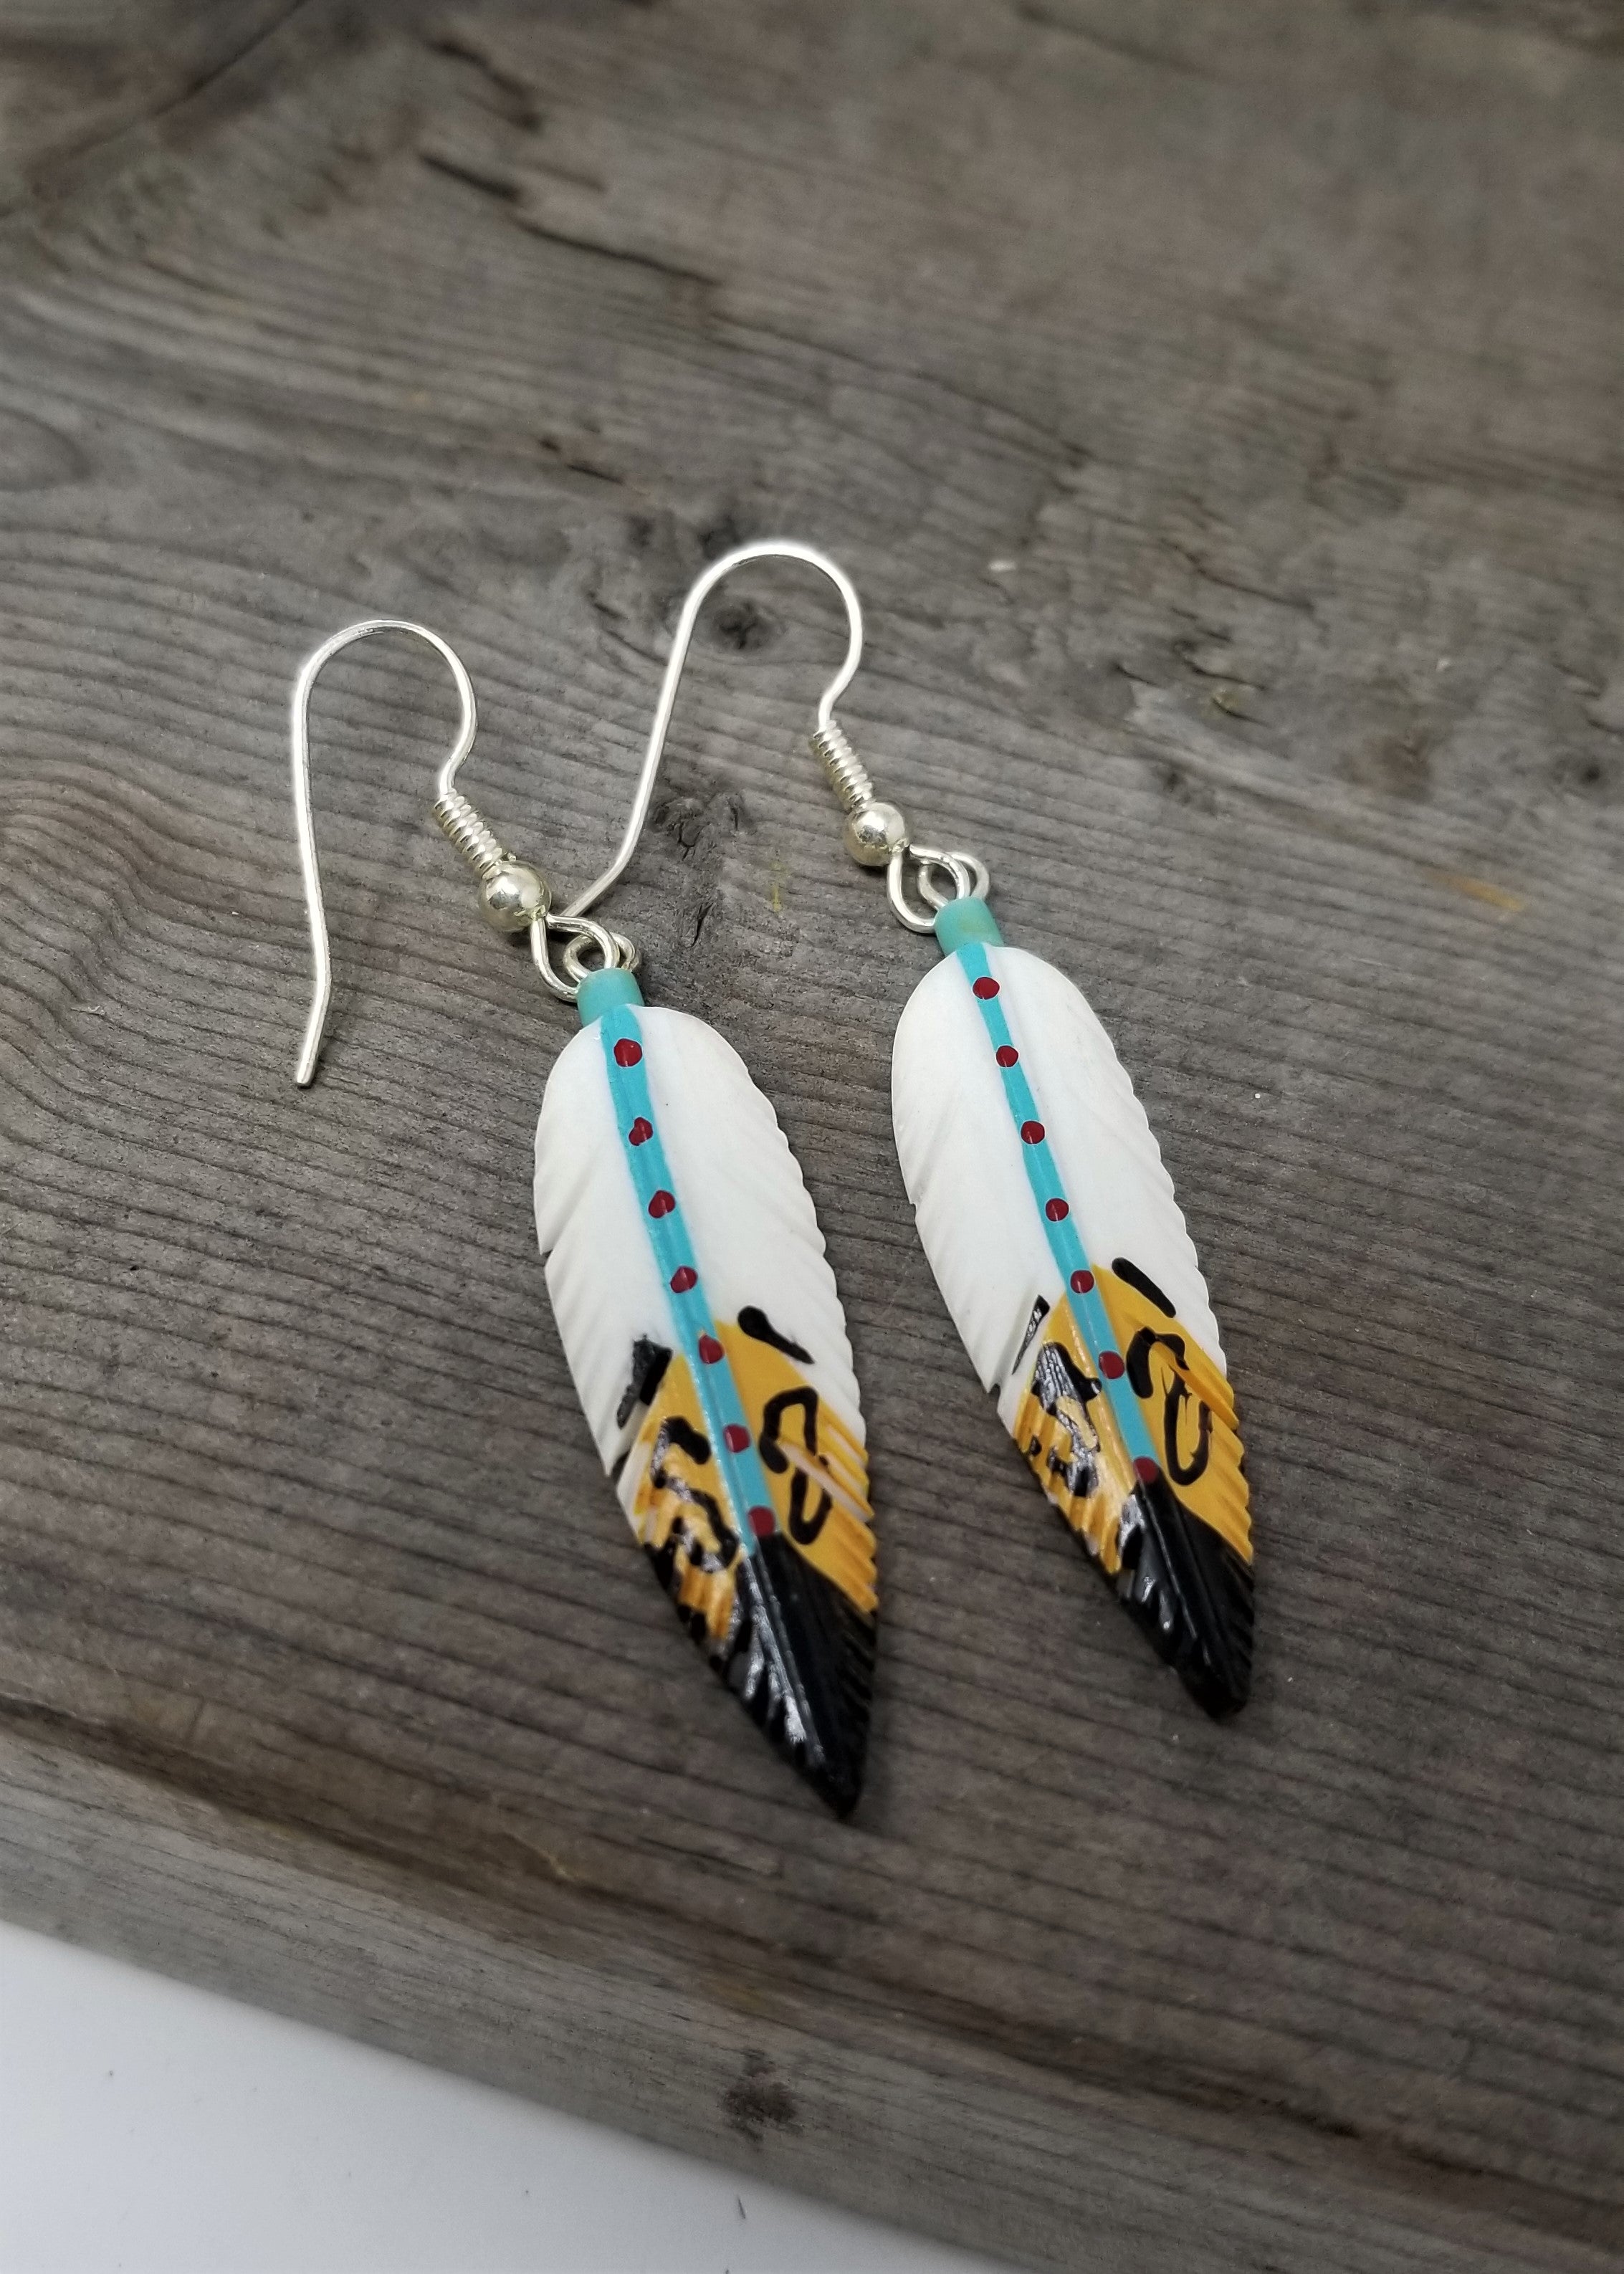 Hand Painted Feather style Earrings Pierced Dangle